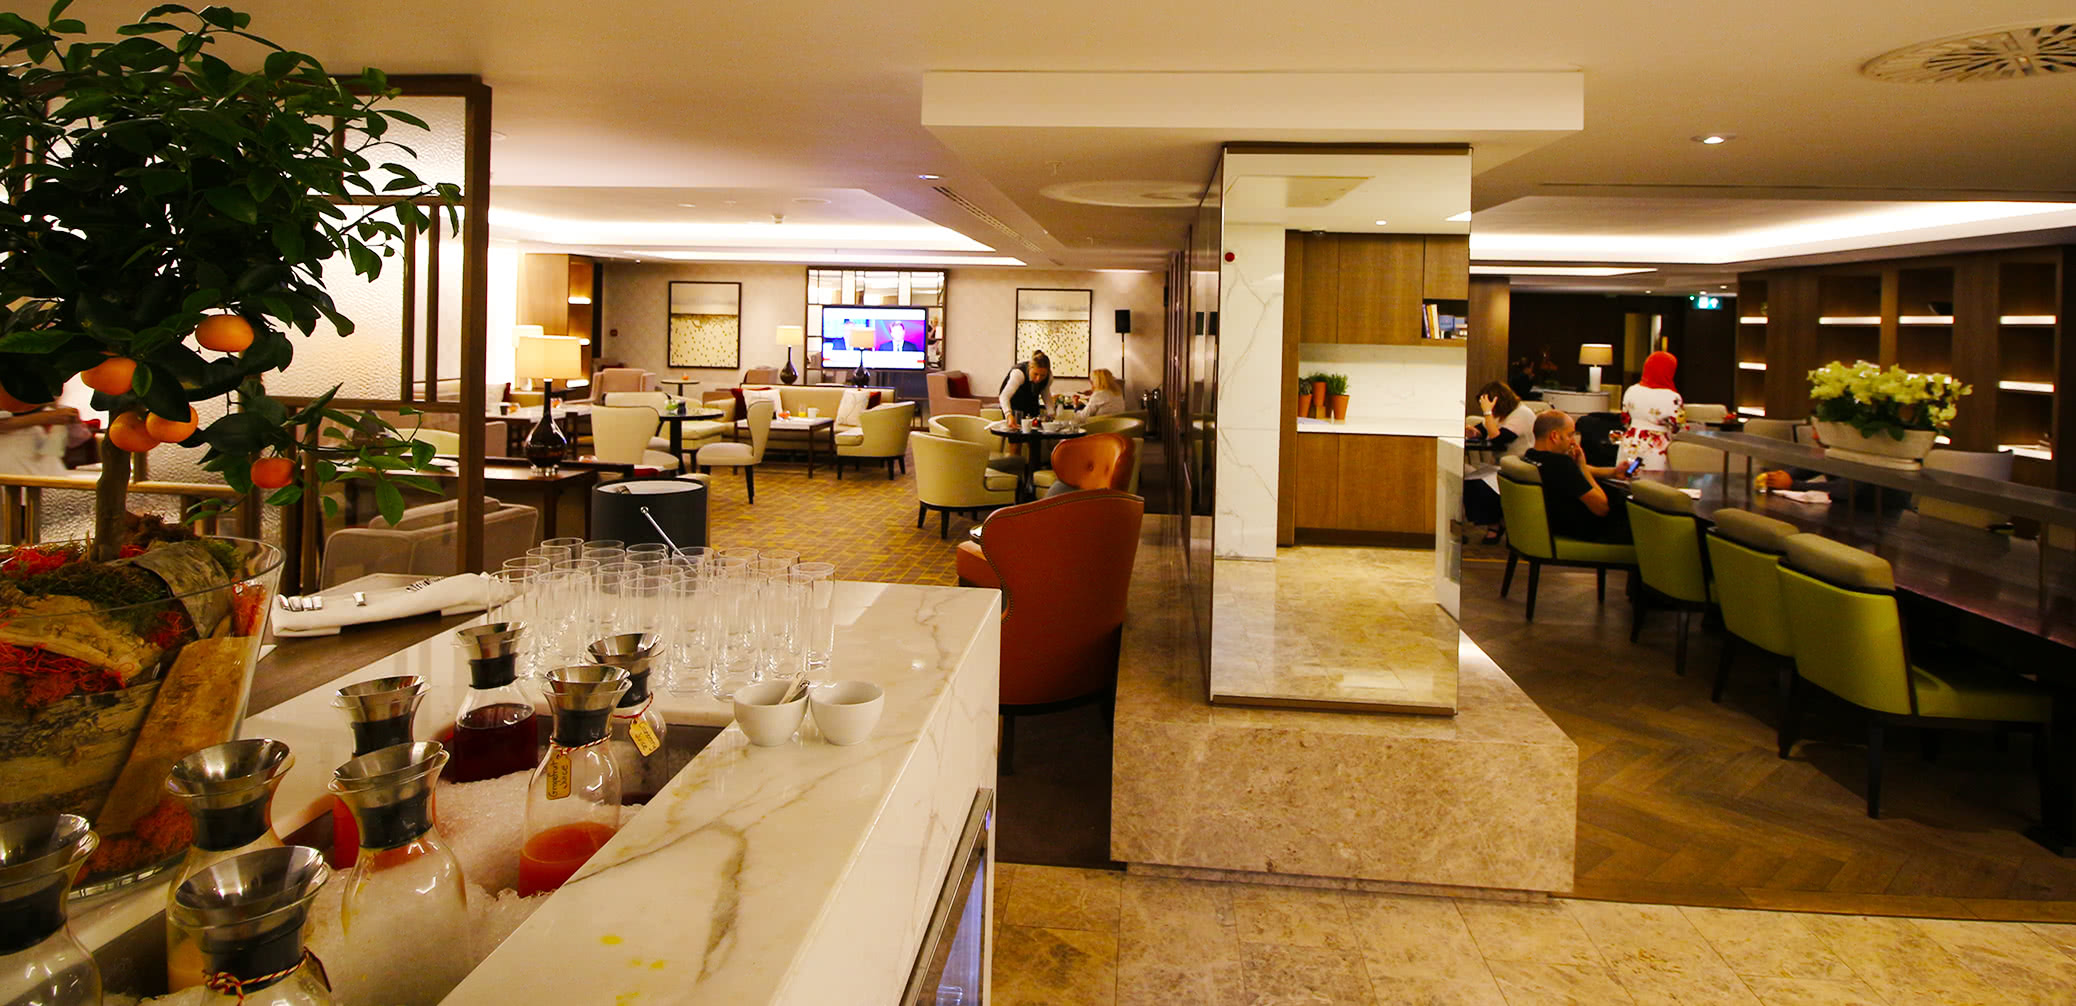 Best Hotel Executive Club Lounges In Athens